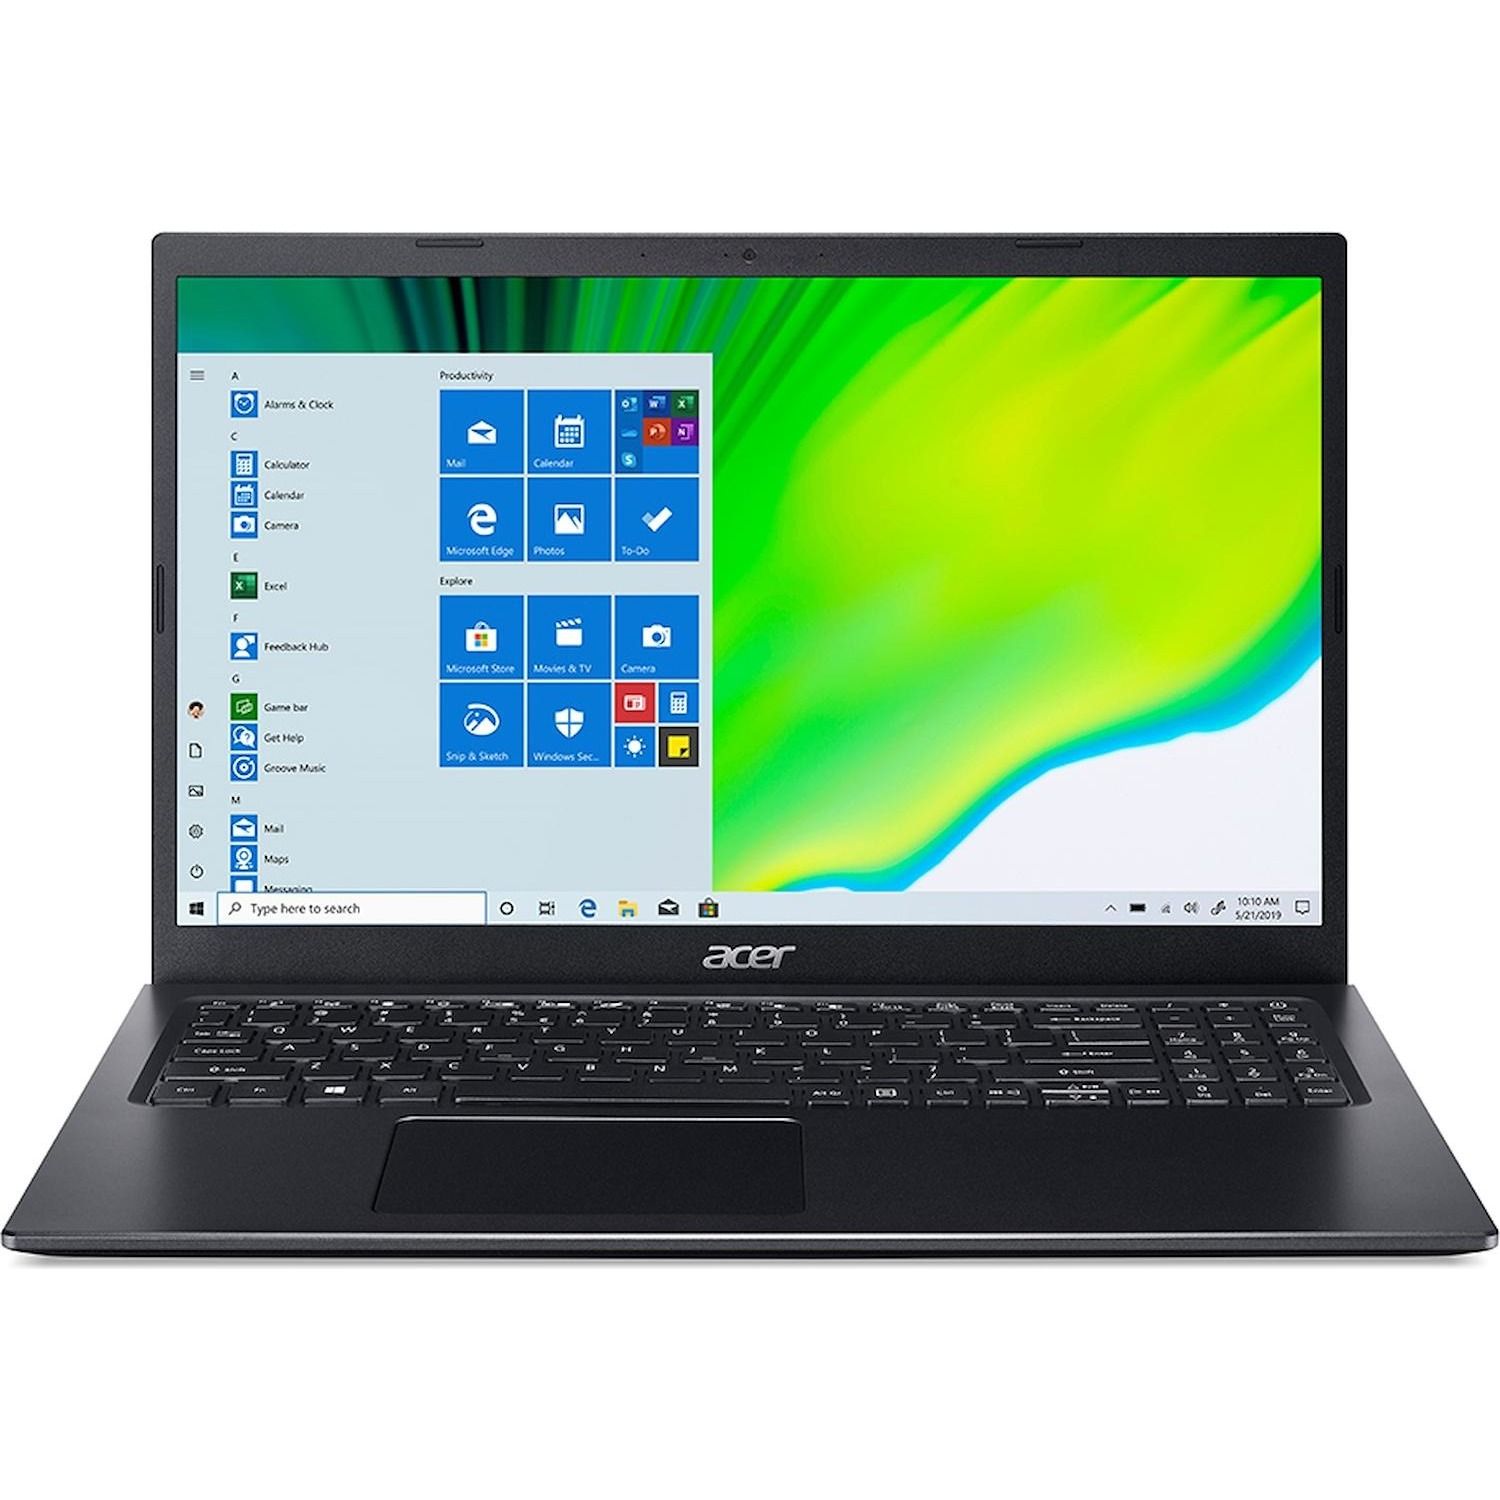 Image of Notebook Acer A515-56-59JM nero